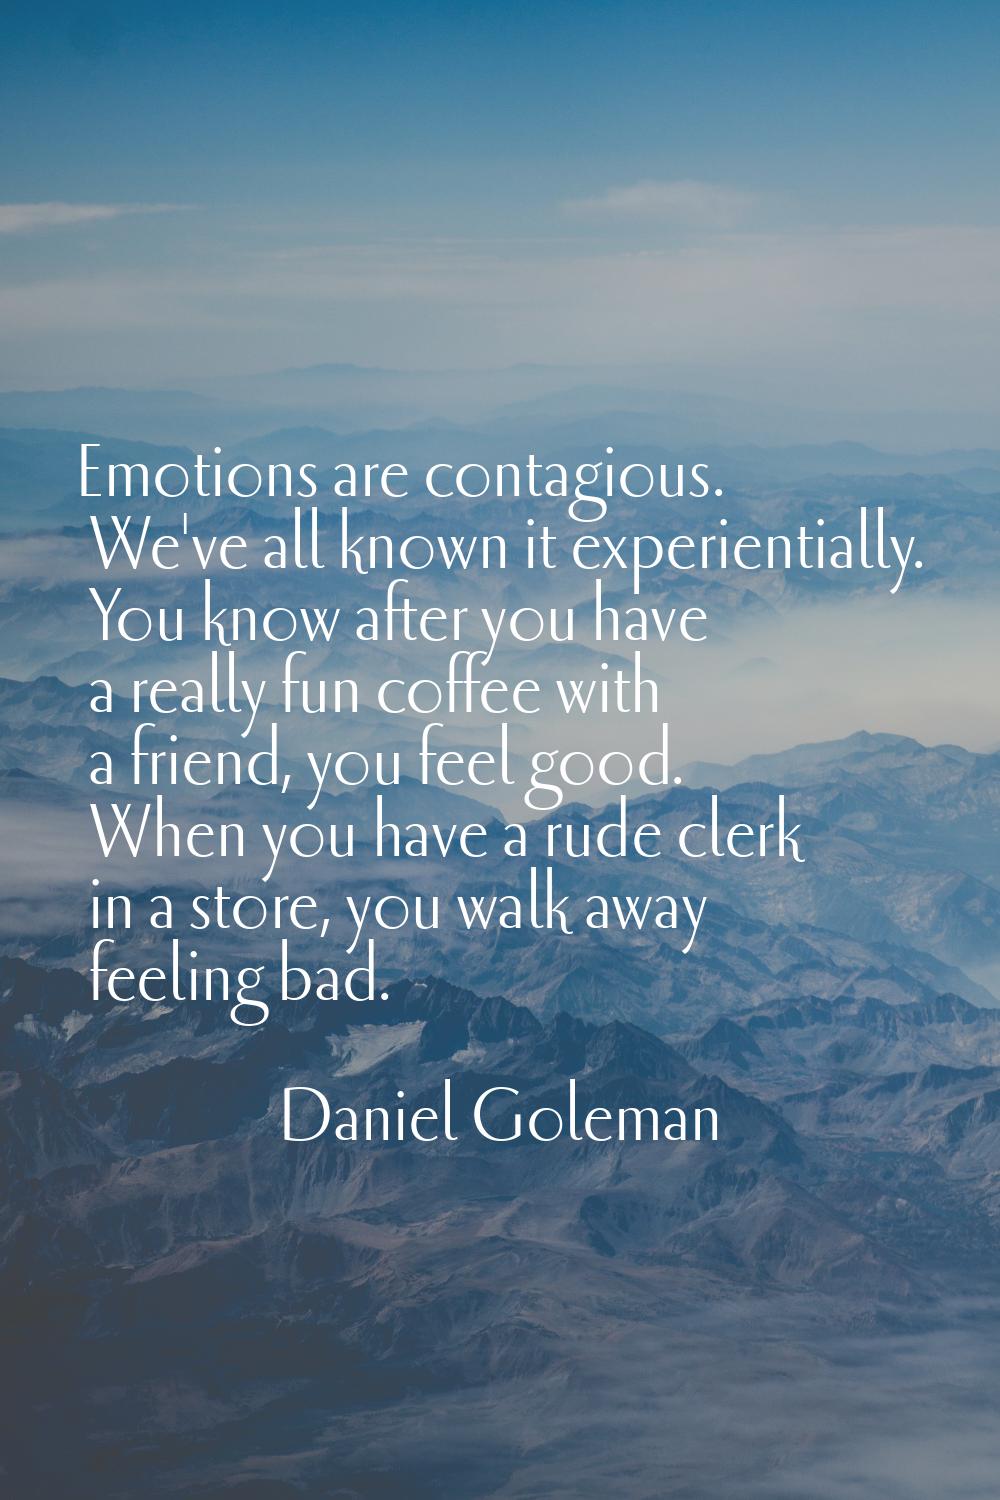 Emotions are contagious. We've all known it experientially. You know after you have a really fun co